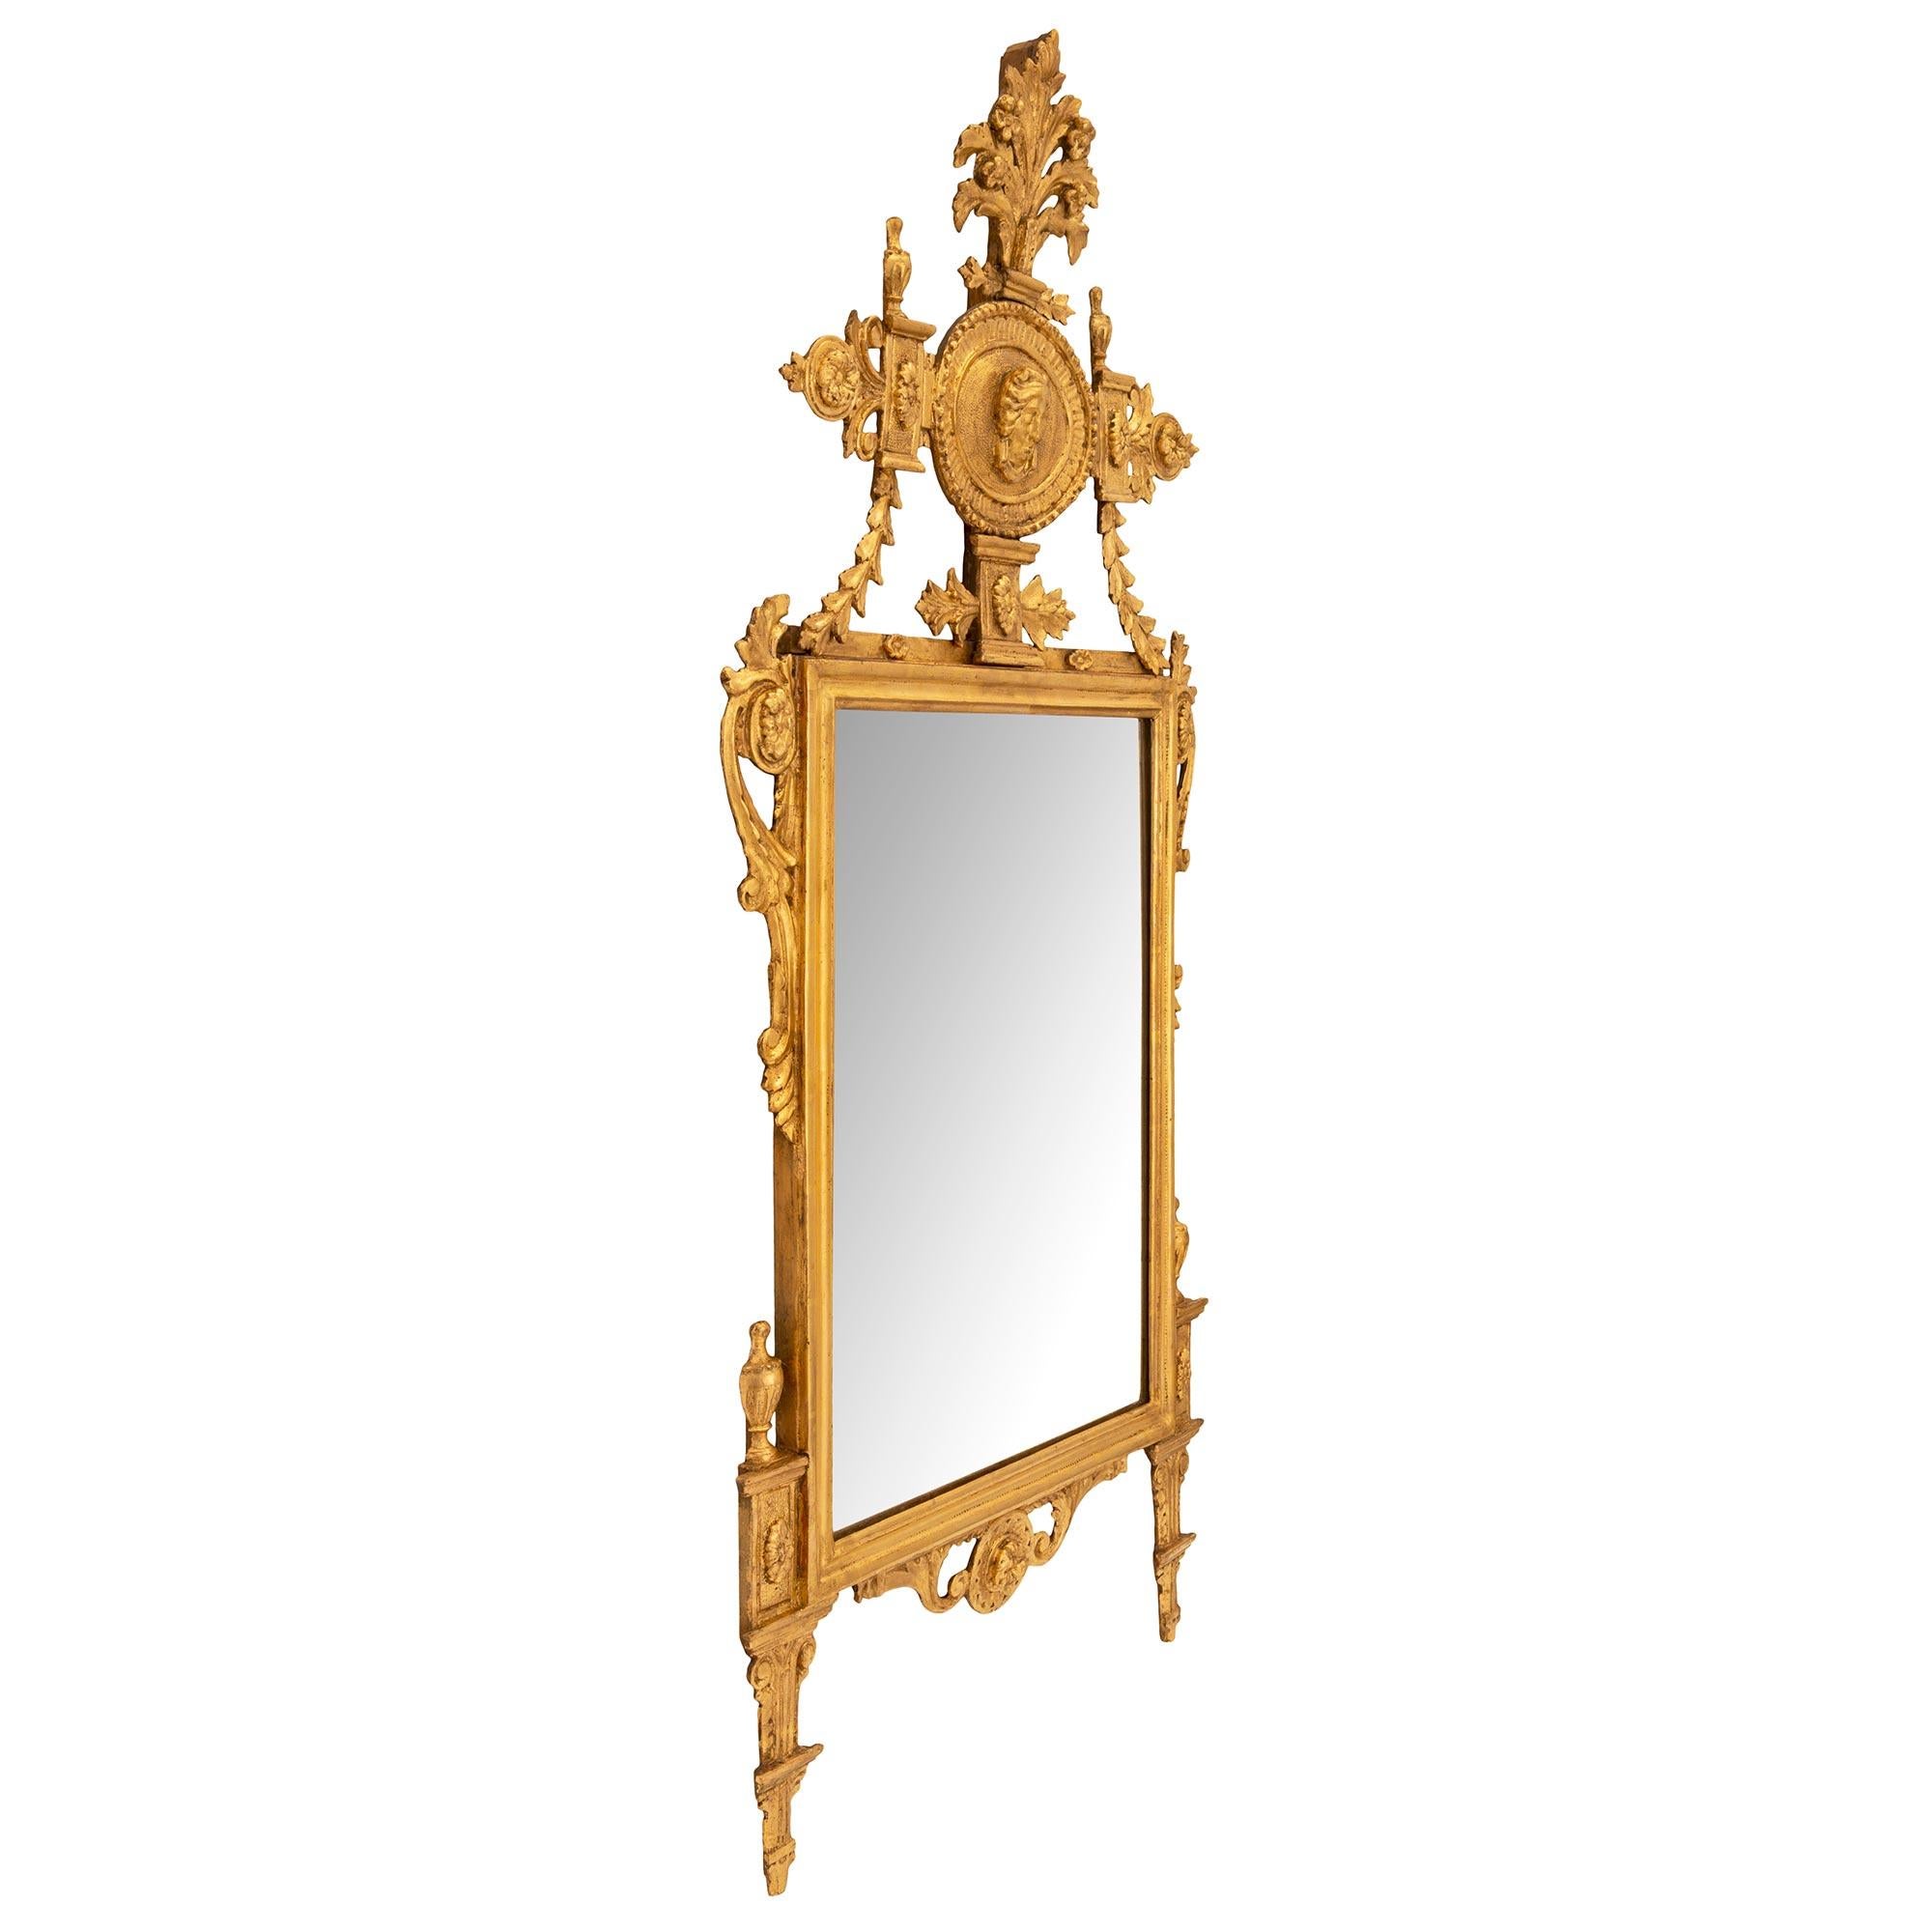 An exceptional and very unique Italian 18th century neo-classical st. giltwood mirror. The mirror retains its original mirror plate set within an elegant wrap around mottled band. The base is centered by a charming richly carved circular floral